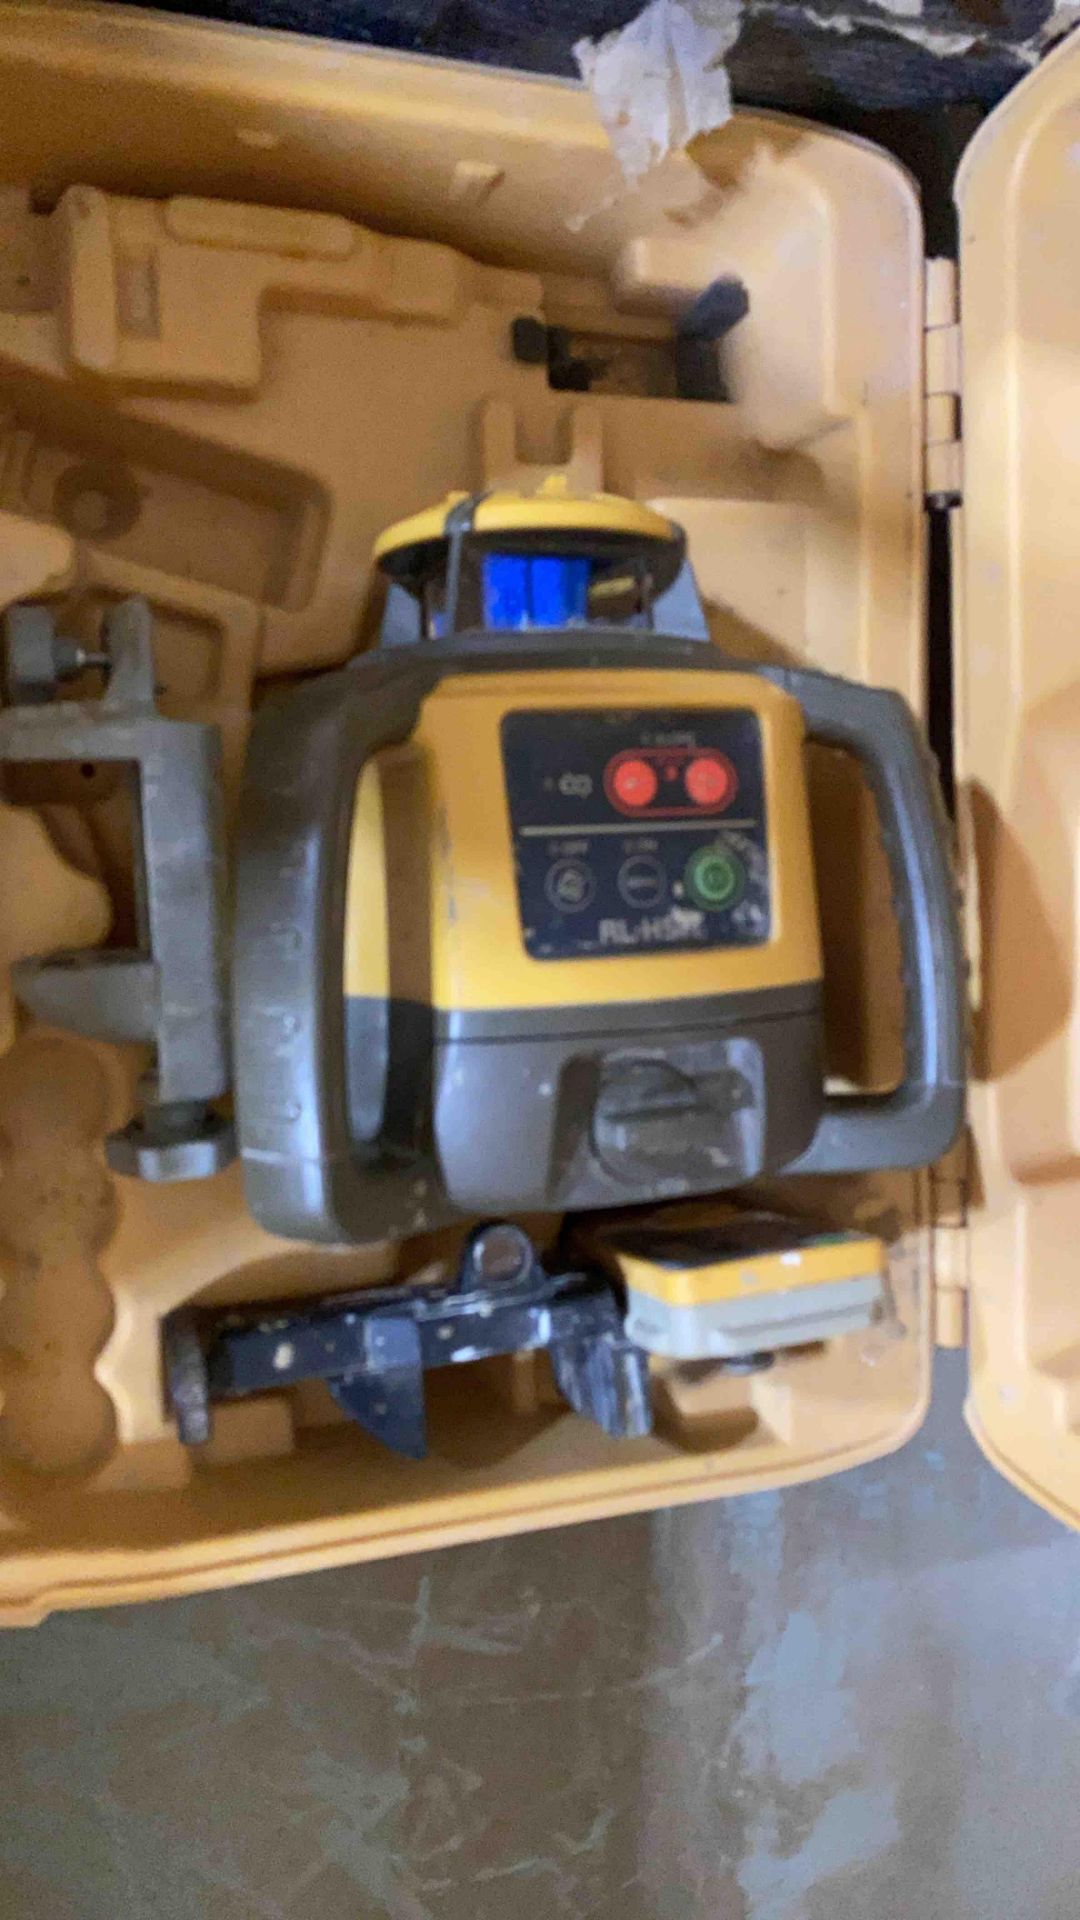 Topcon RL-H5 laser level complete with carry case and top con LS-80L handheld control - Image 2 of 4